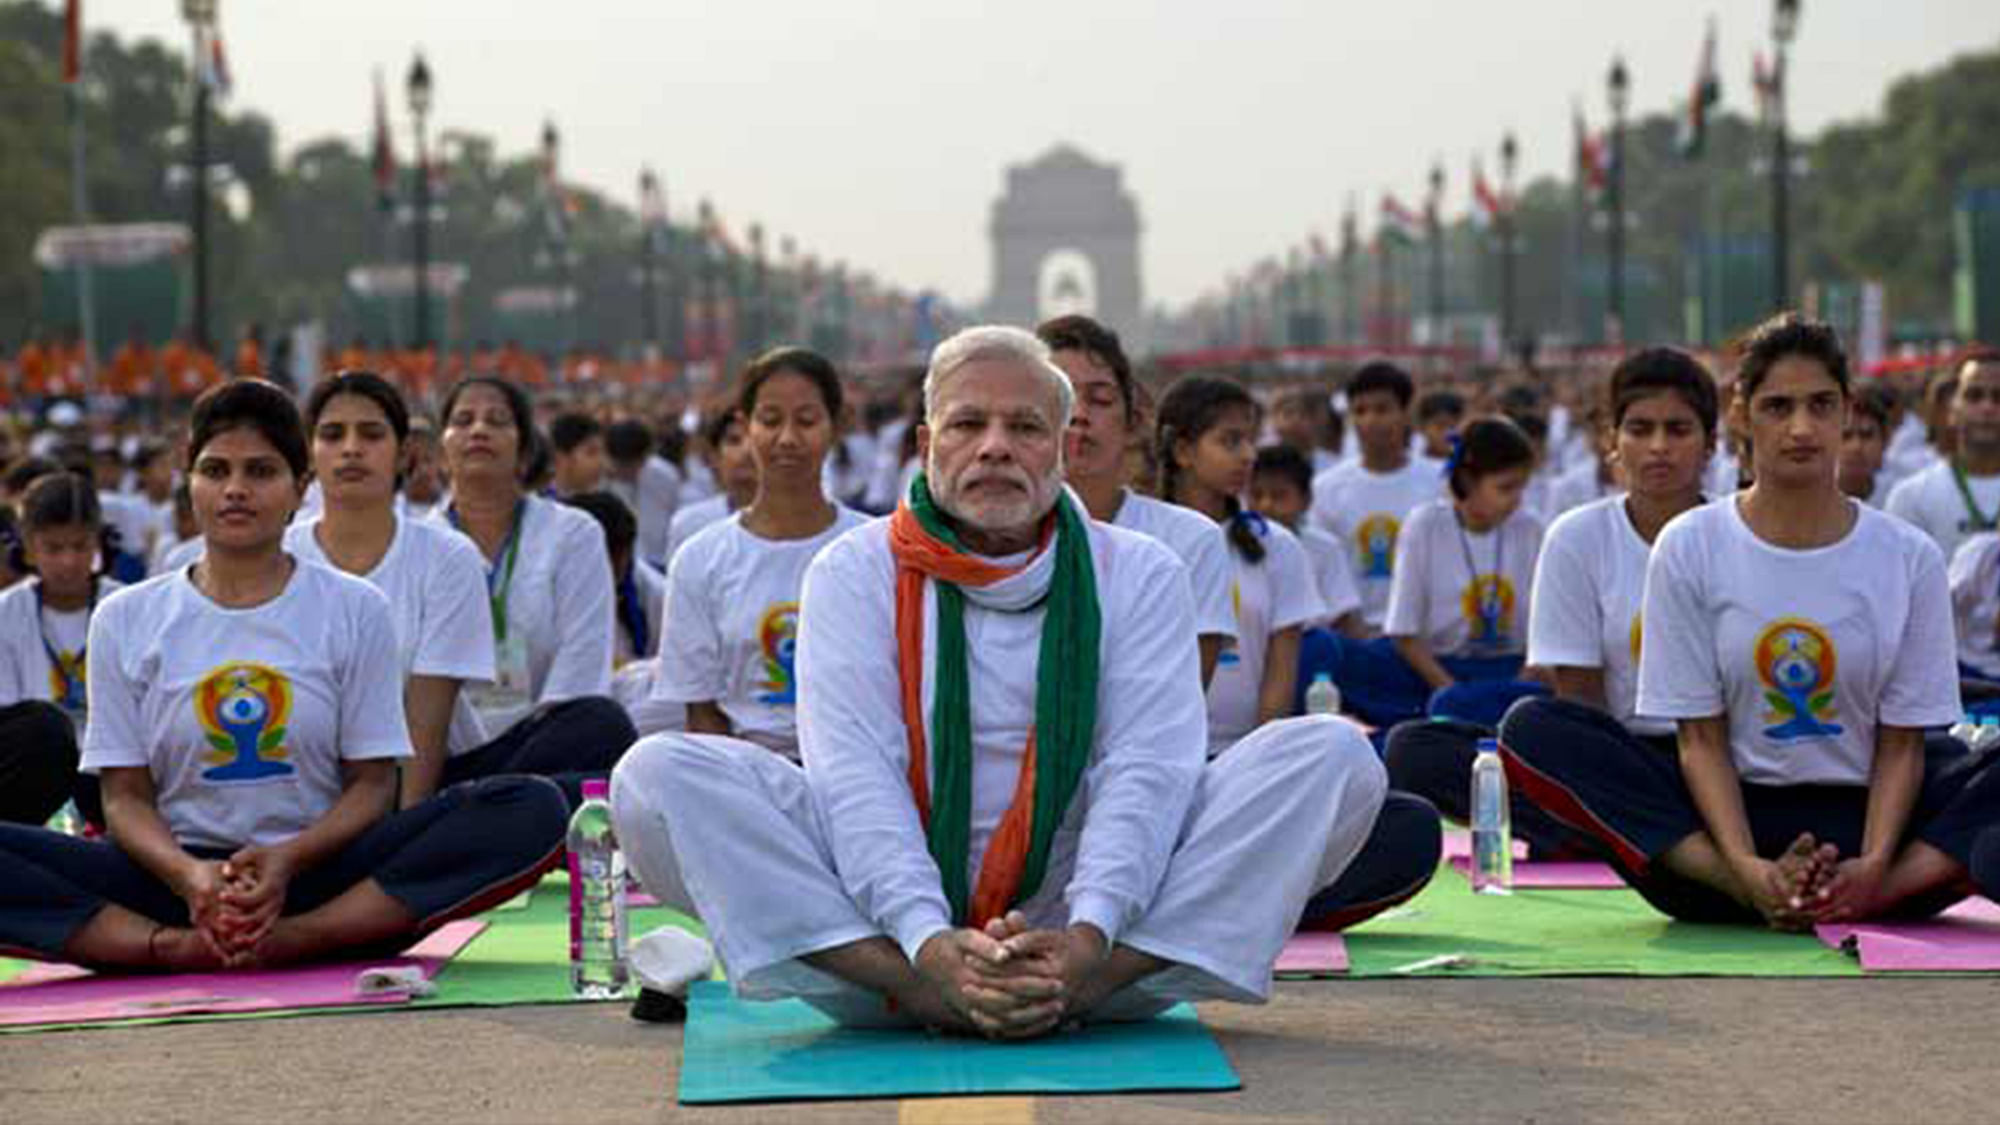 Prime Minister Narendra Modi, (centre), performing yoga along with thousands of Indians on Rajpath, in New Delhi, India, Sunday, June 21, 2015. (Photo: PTI)